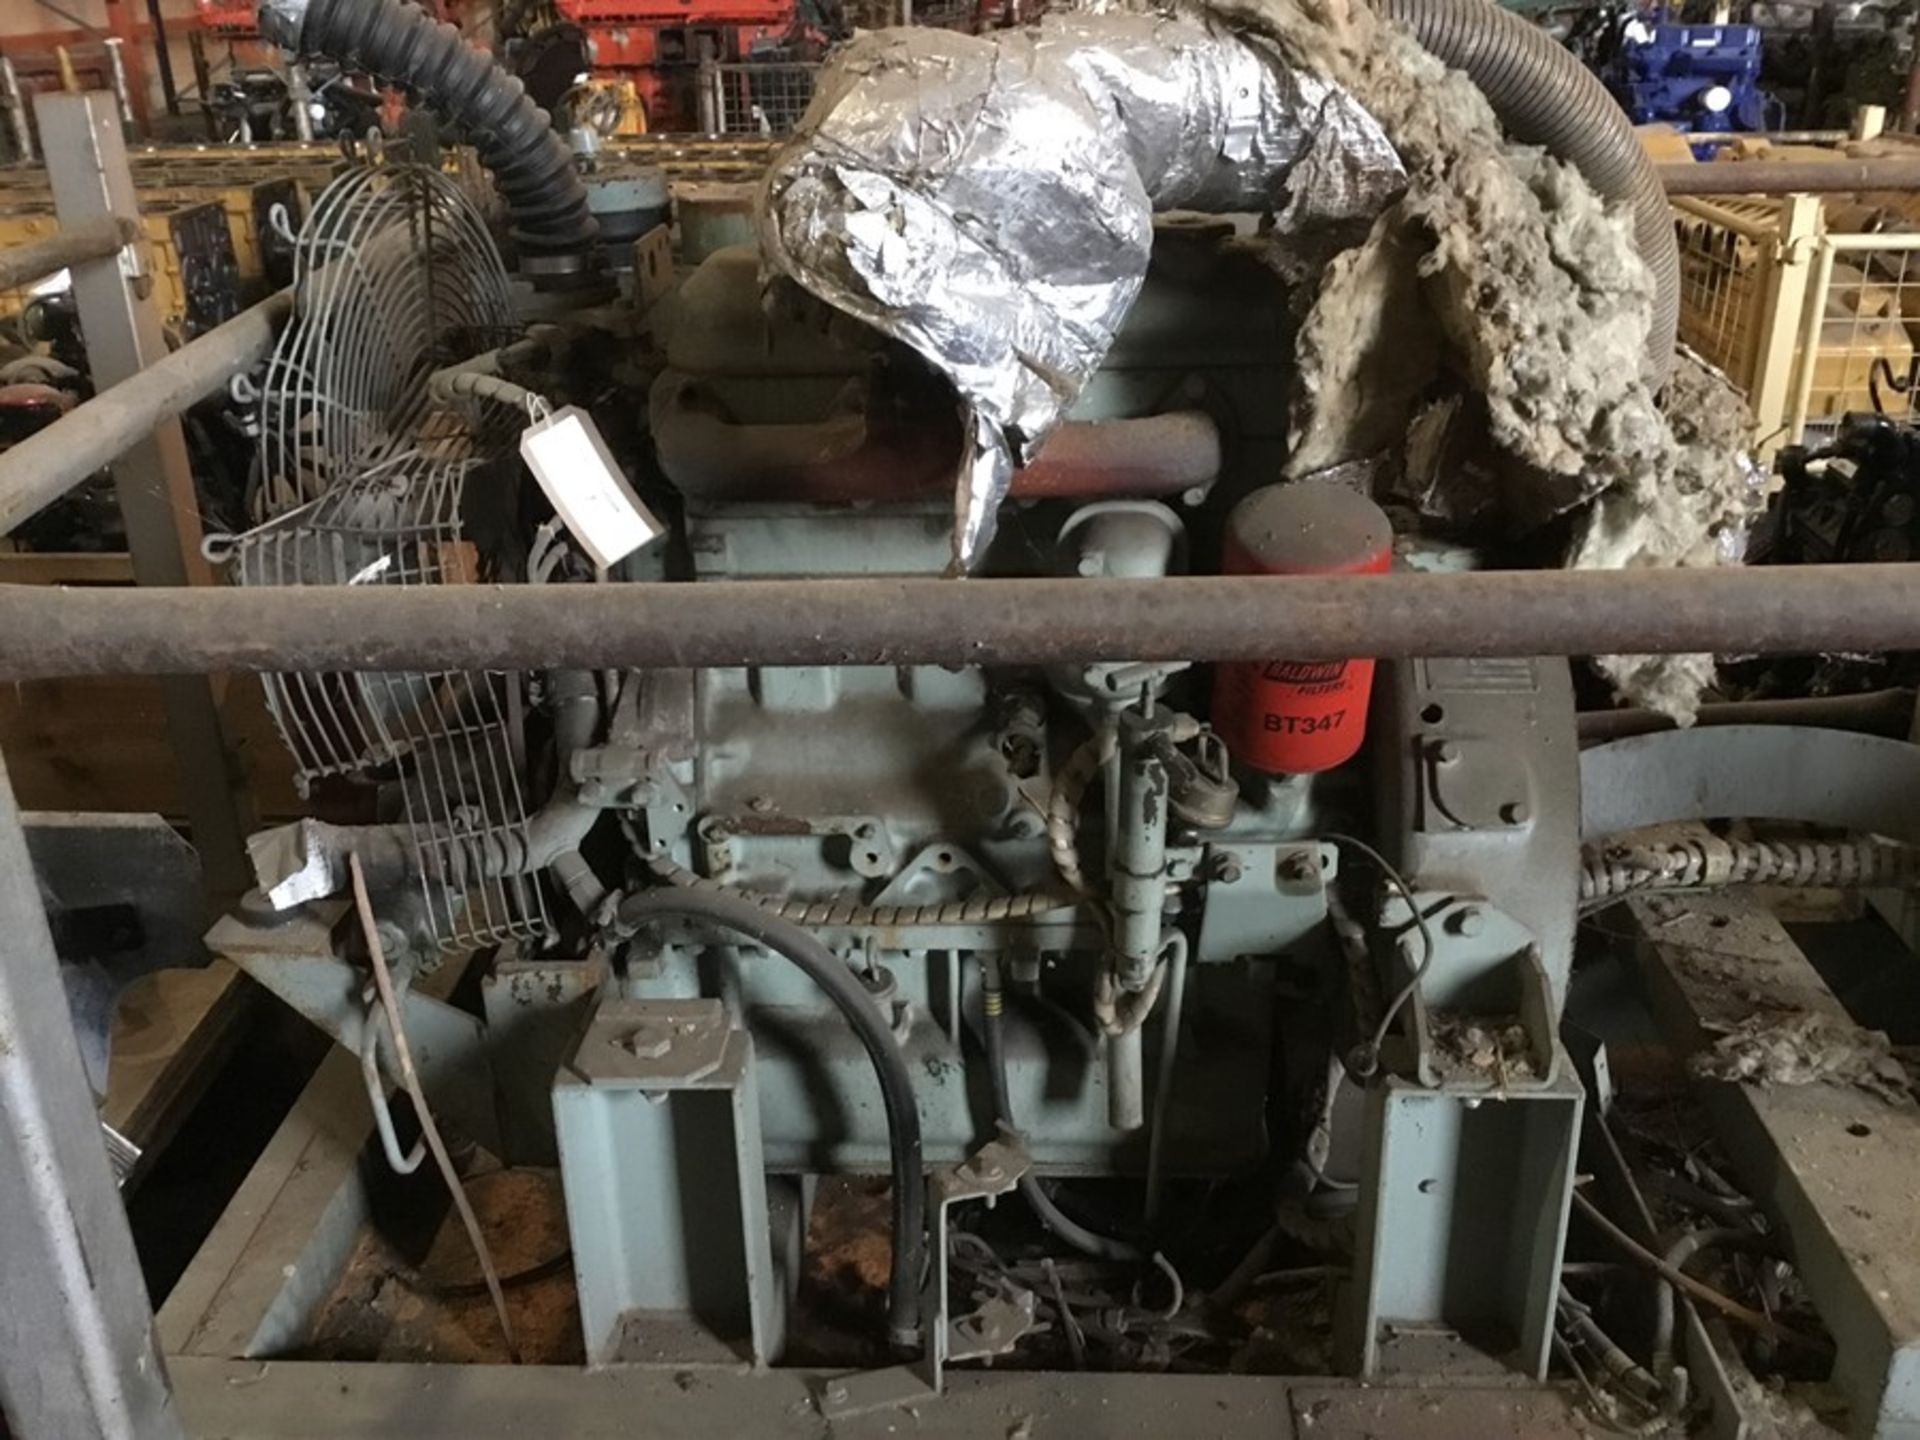 Iveco 8041 Diesel engine: Iveco 8041.04 4cyl non Turbo, Serial 8041.0*306-747516 Incomplete - Image 7 of 15